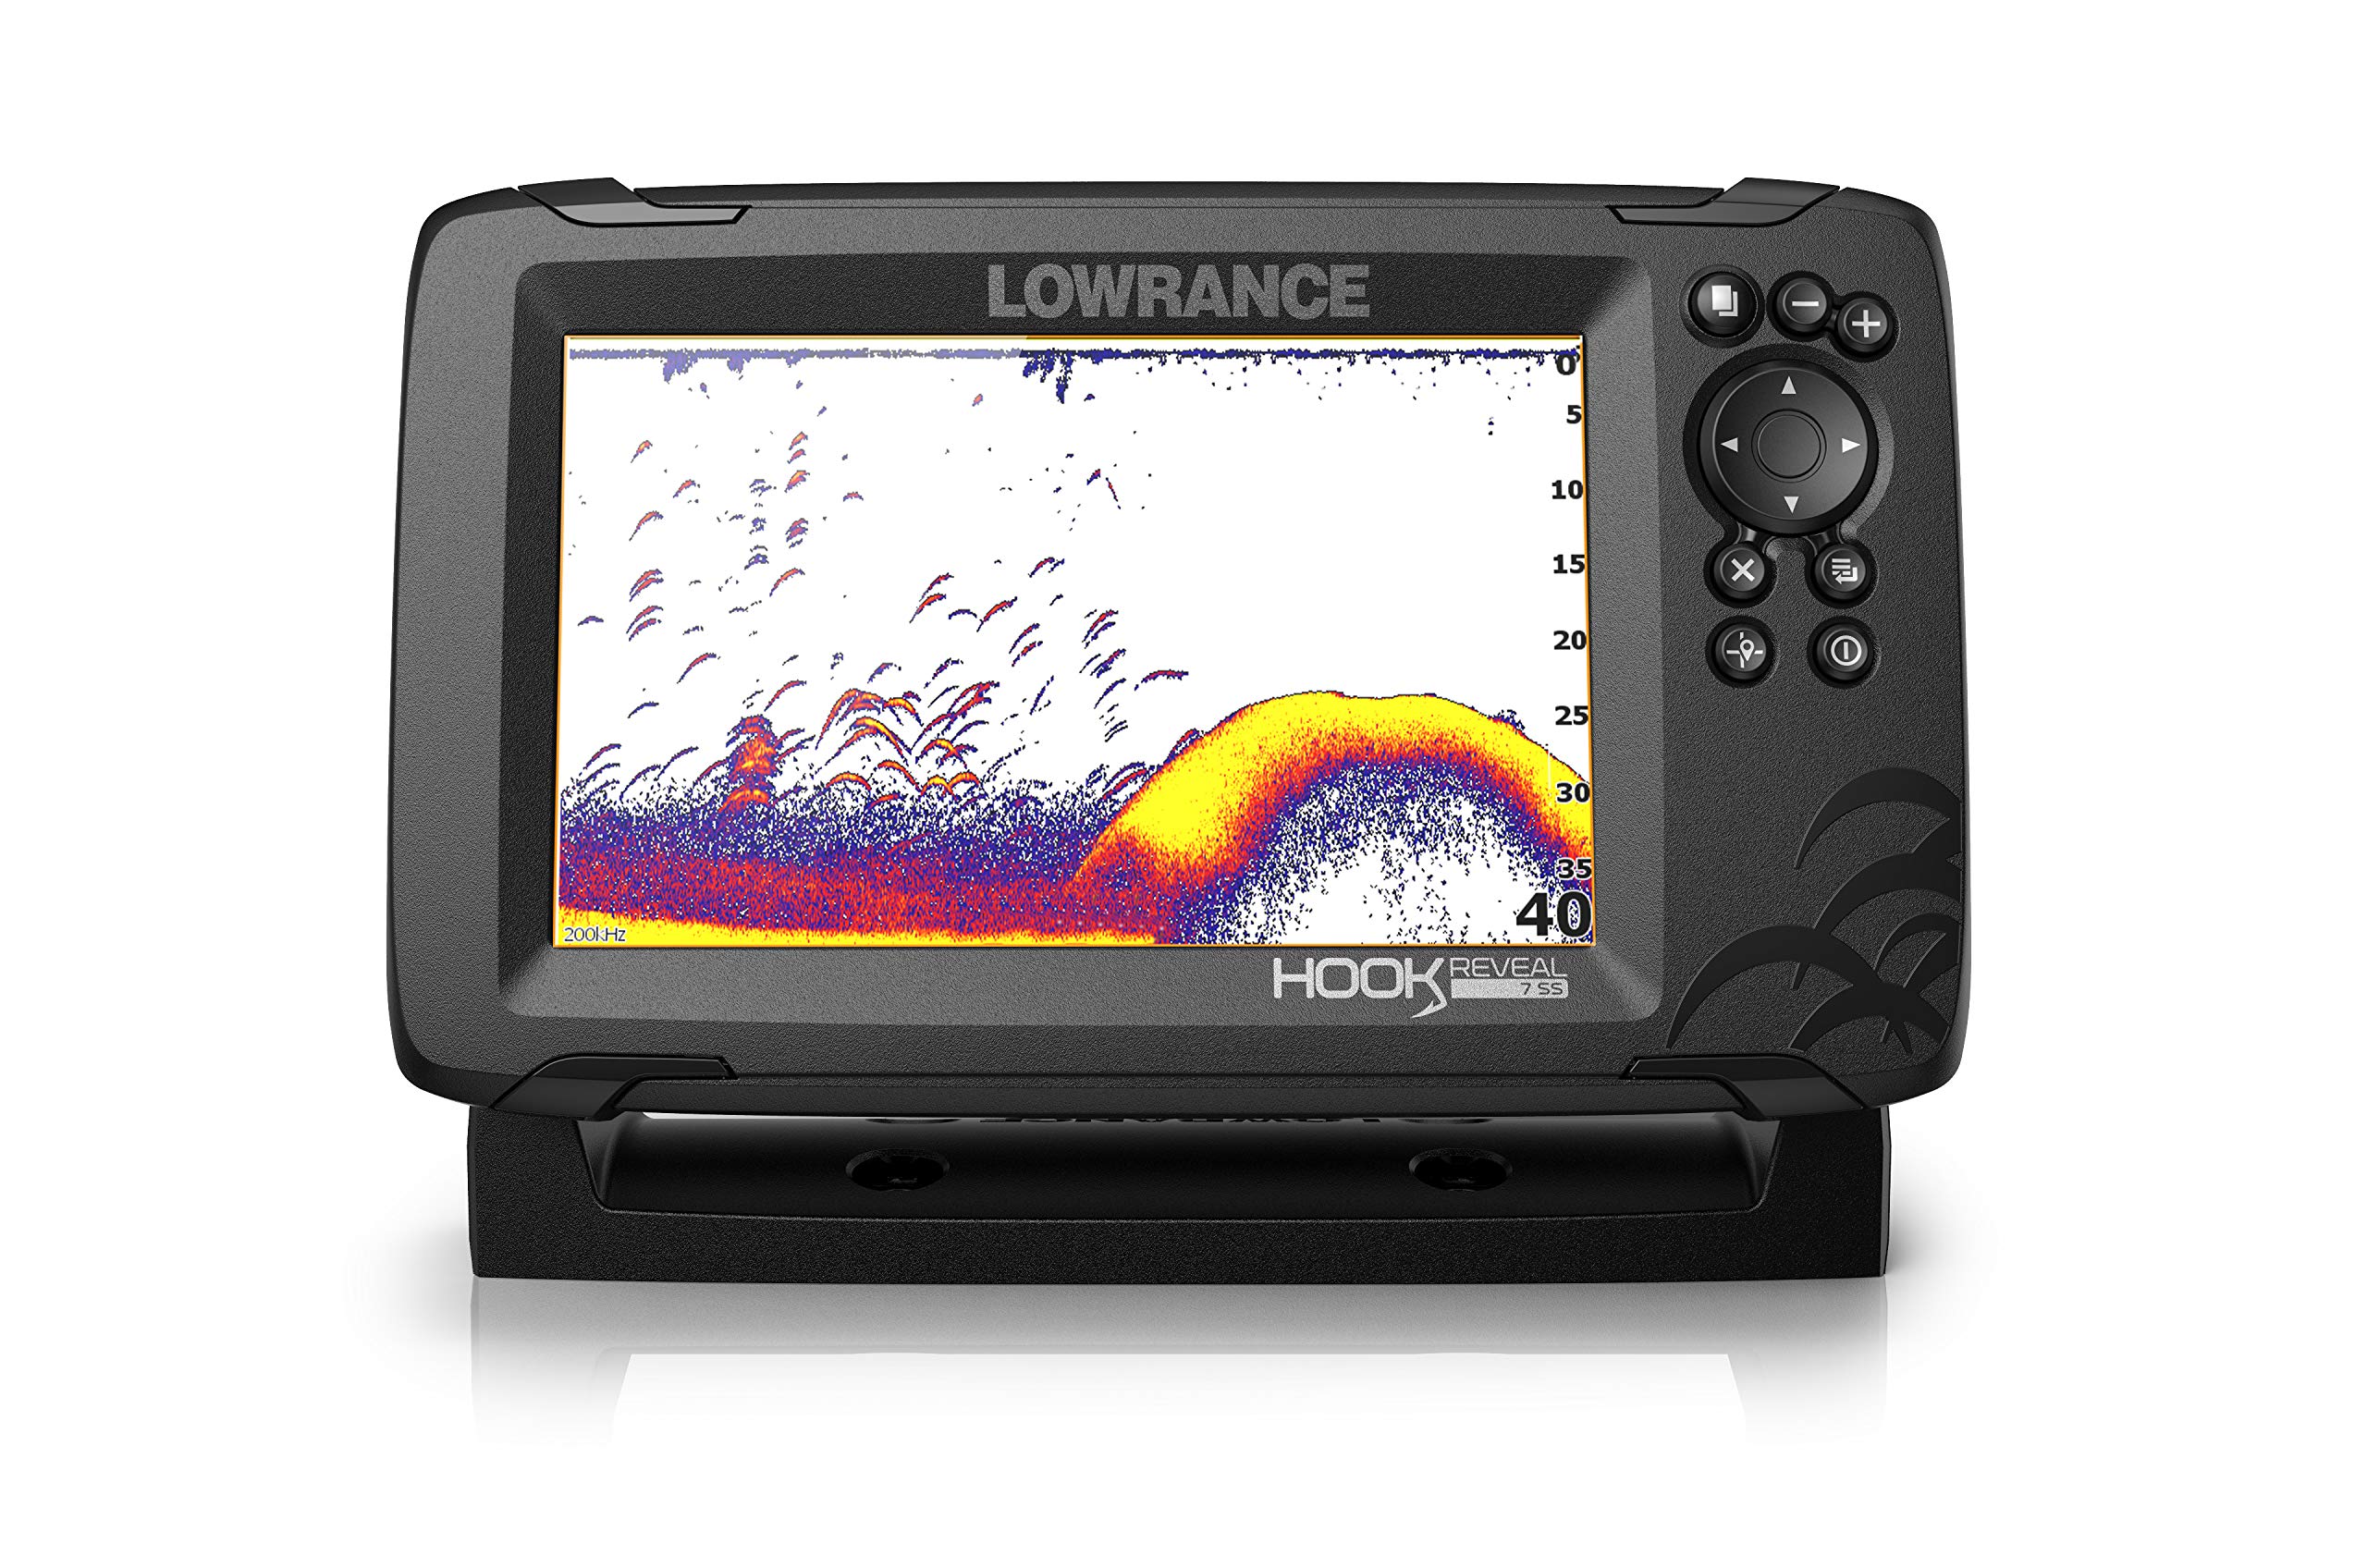 Lowrance Hook Reveal 7 Inch Fish Finders with Transducer Plus Optional  Preloaded Maps 7 Hdi Deep Water C-map Contour+ Maps Fish Finder